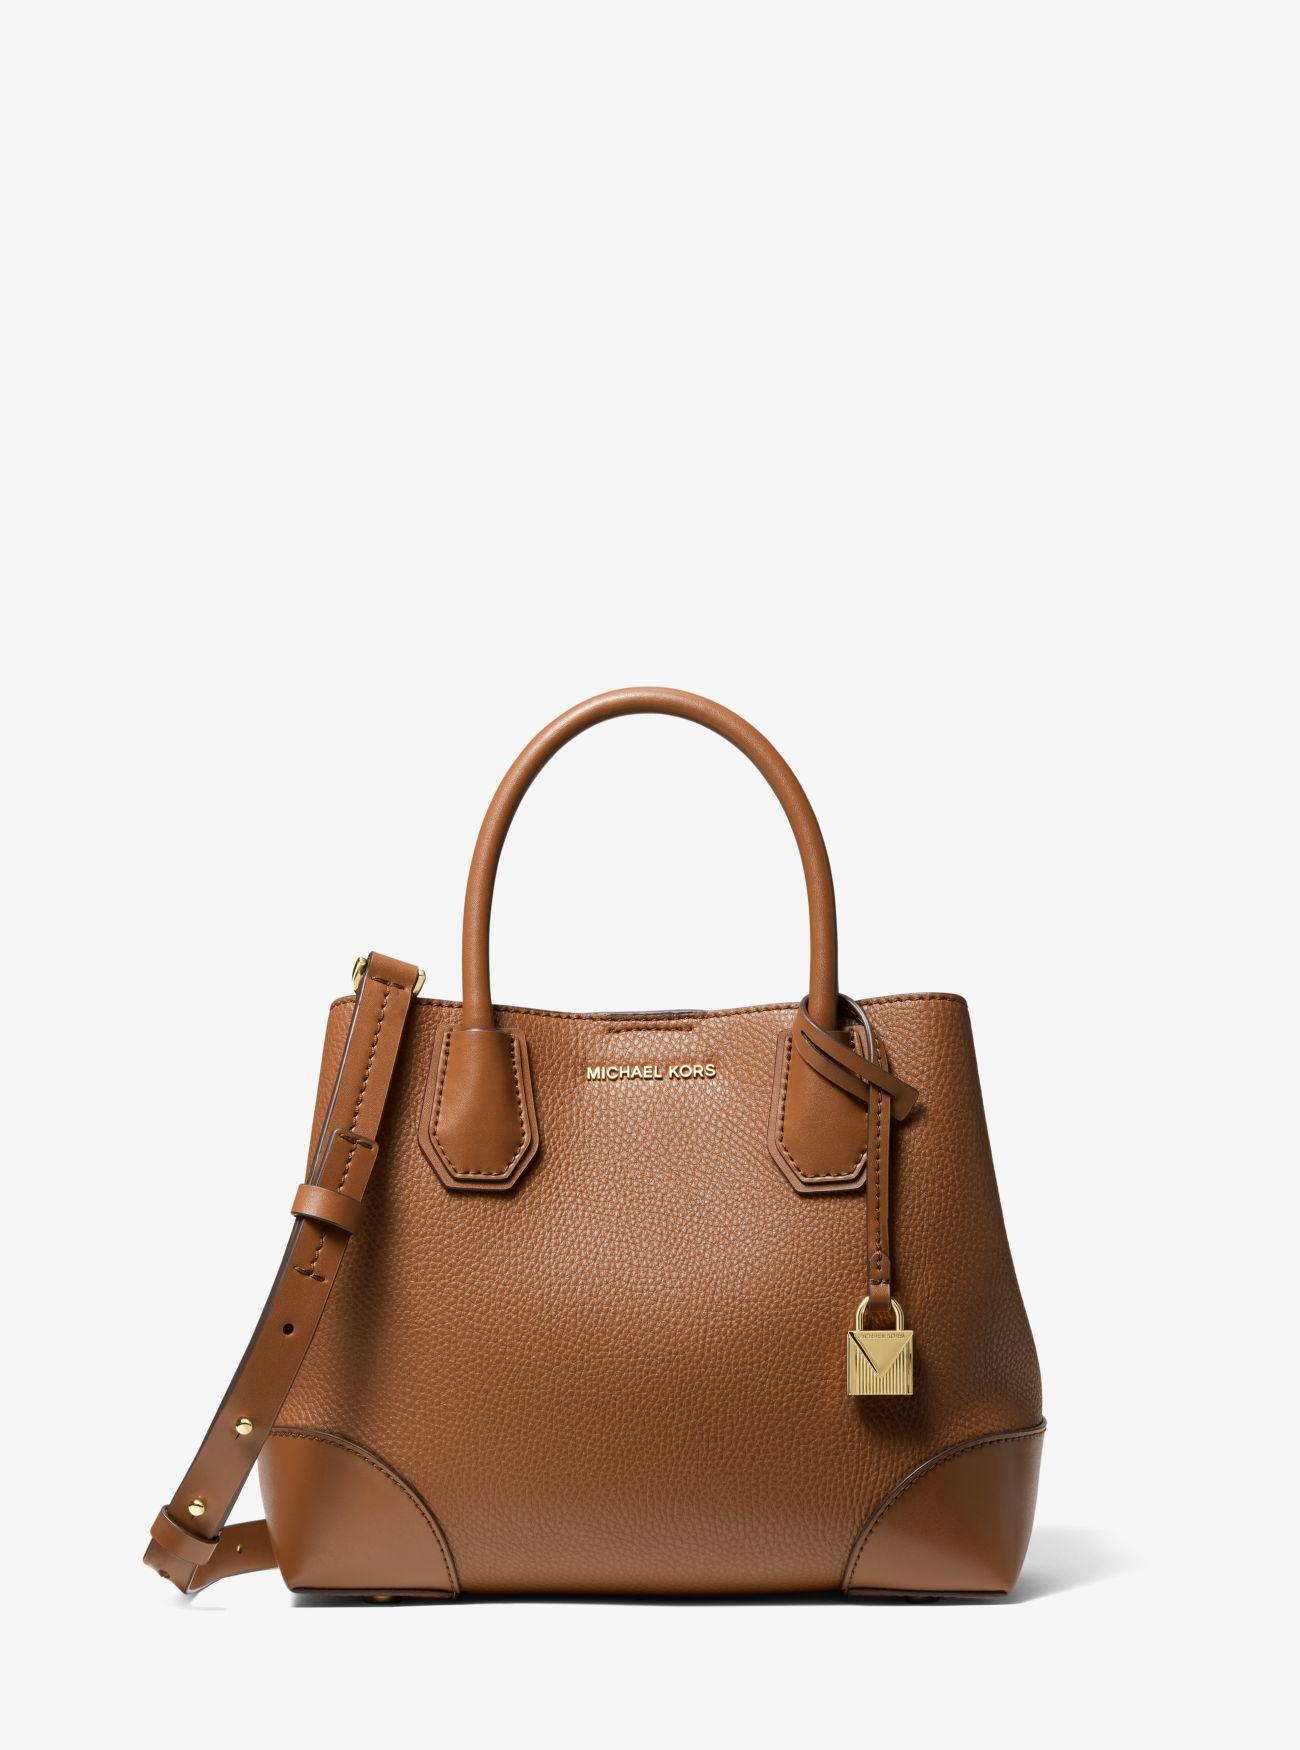 Michael Kors Mercer Gallery Small Faux Pebbled Leather Tote Bag in Brown |  Lyst UK